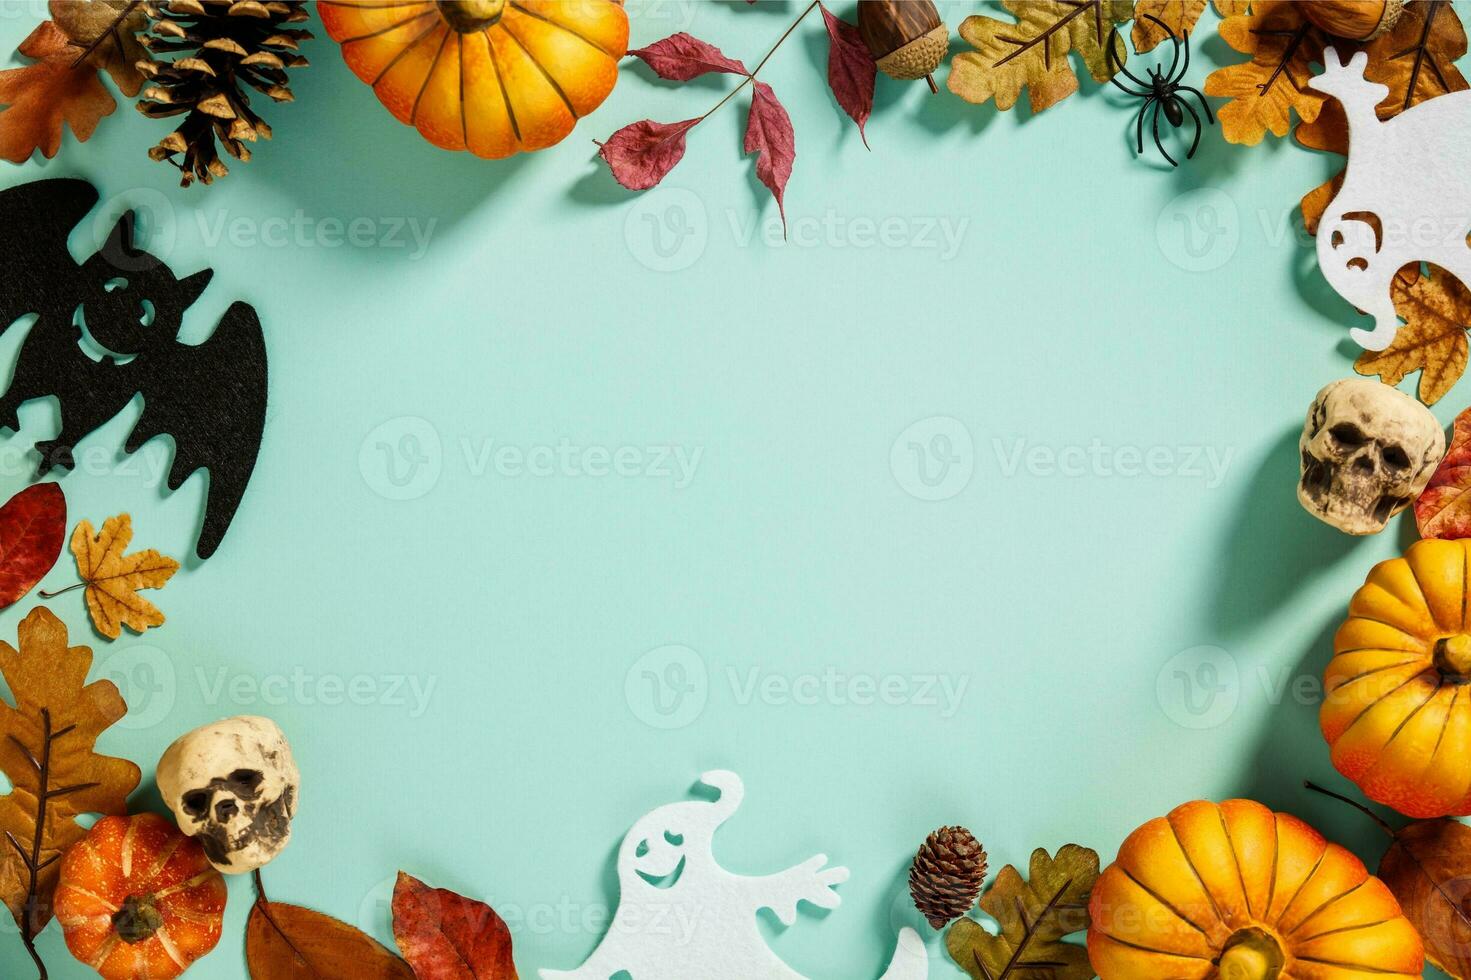 Colorful Autumn Blooms and Festive Decorations on an Empty Dining Table photo